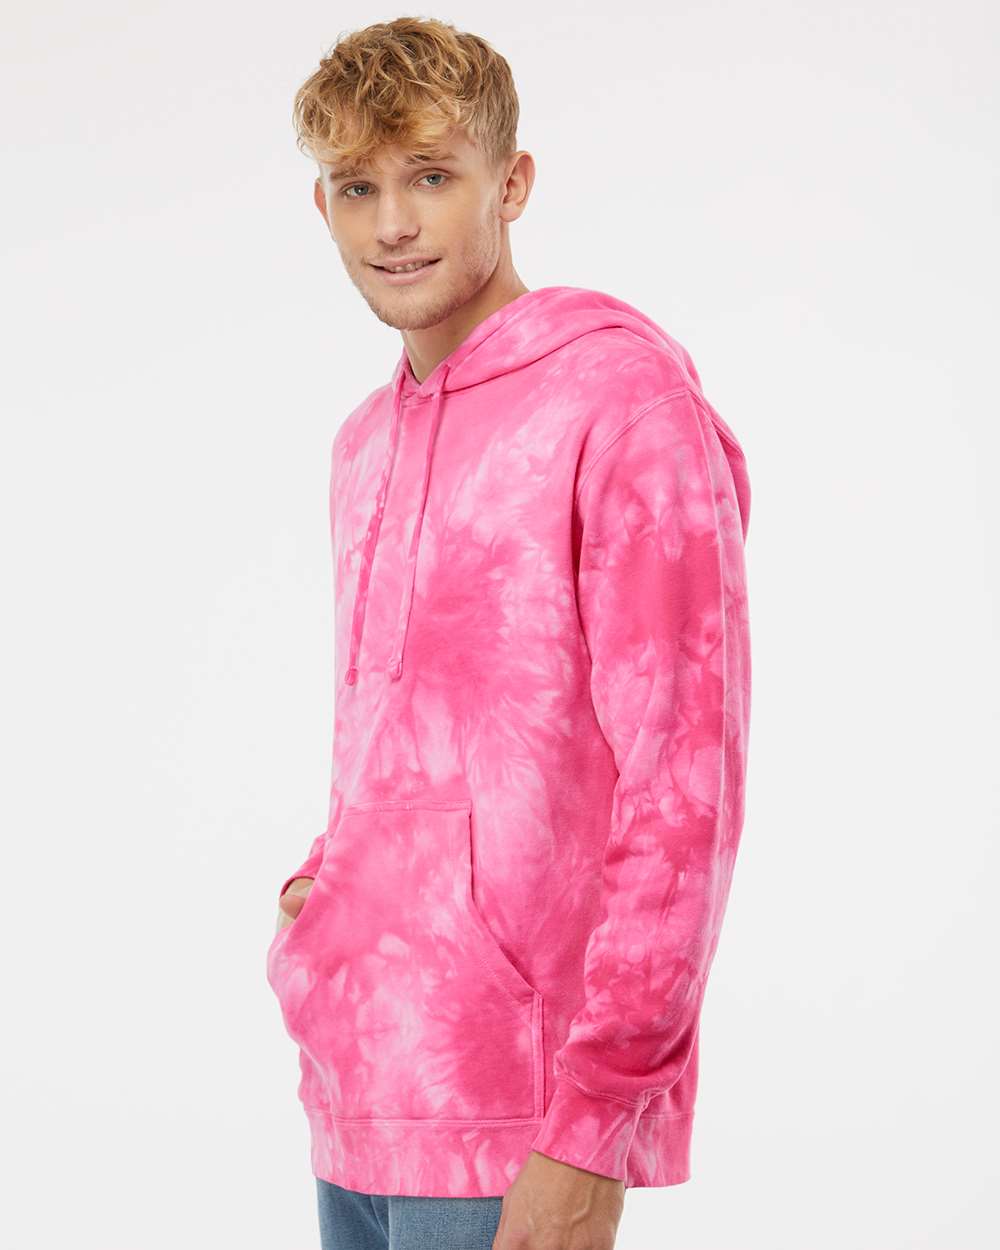 Independent Trading Co. Unisex Midweight Tie-Dyed Hooded Sweatshirt PRM4500TD #colormdl_Tie Dye Pink